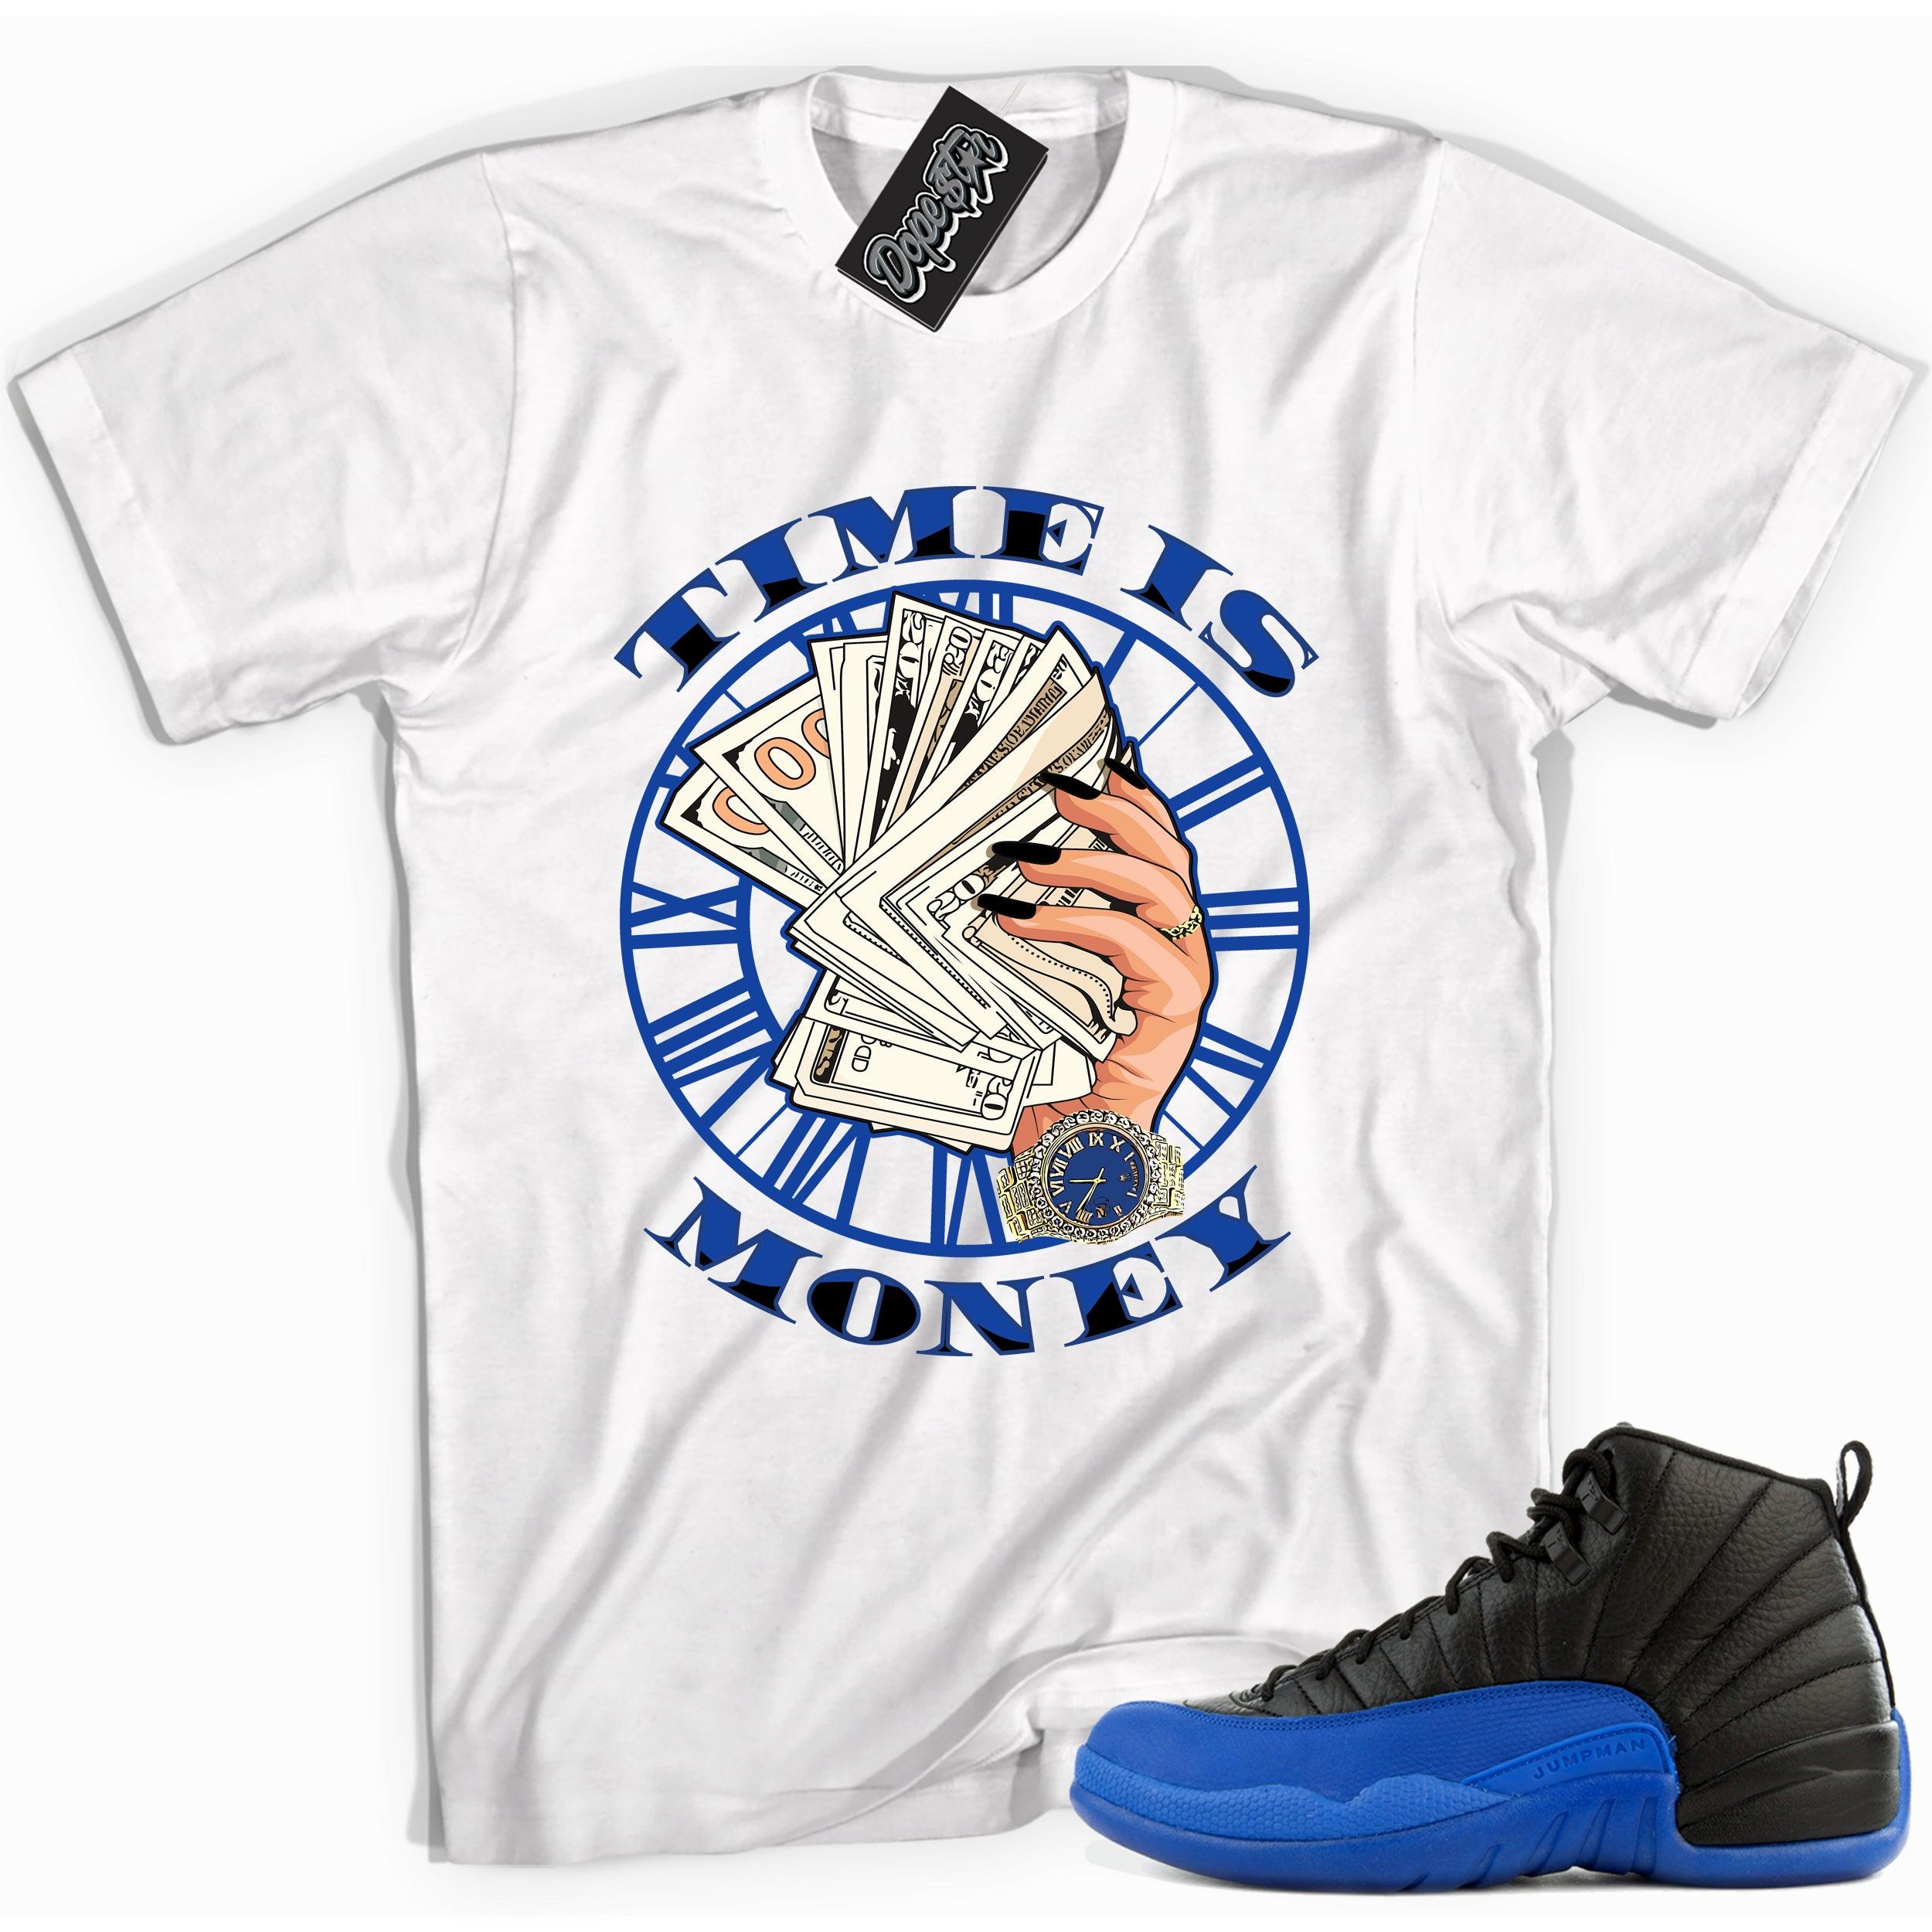 Cool white graphic tee with 'time is money' print, that perfectly matches Air Jordan 12 Retro Black Game Royal sneakers.